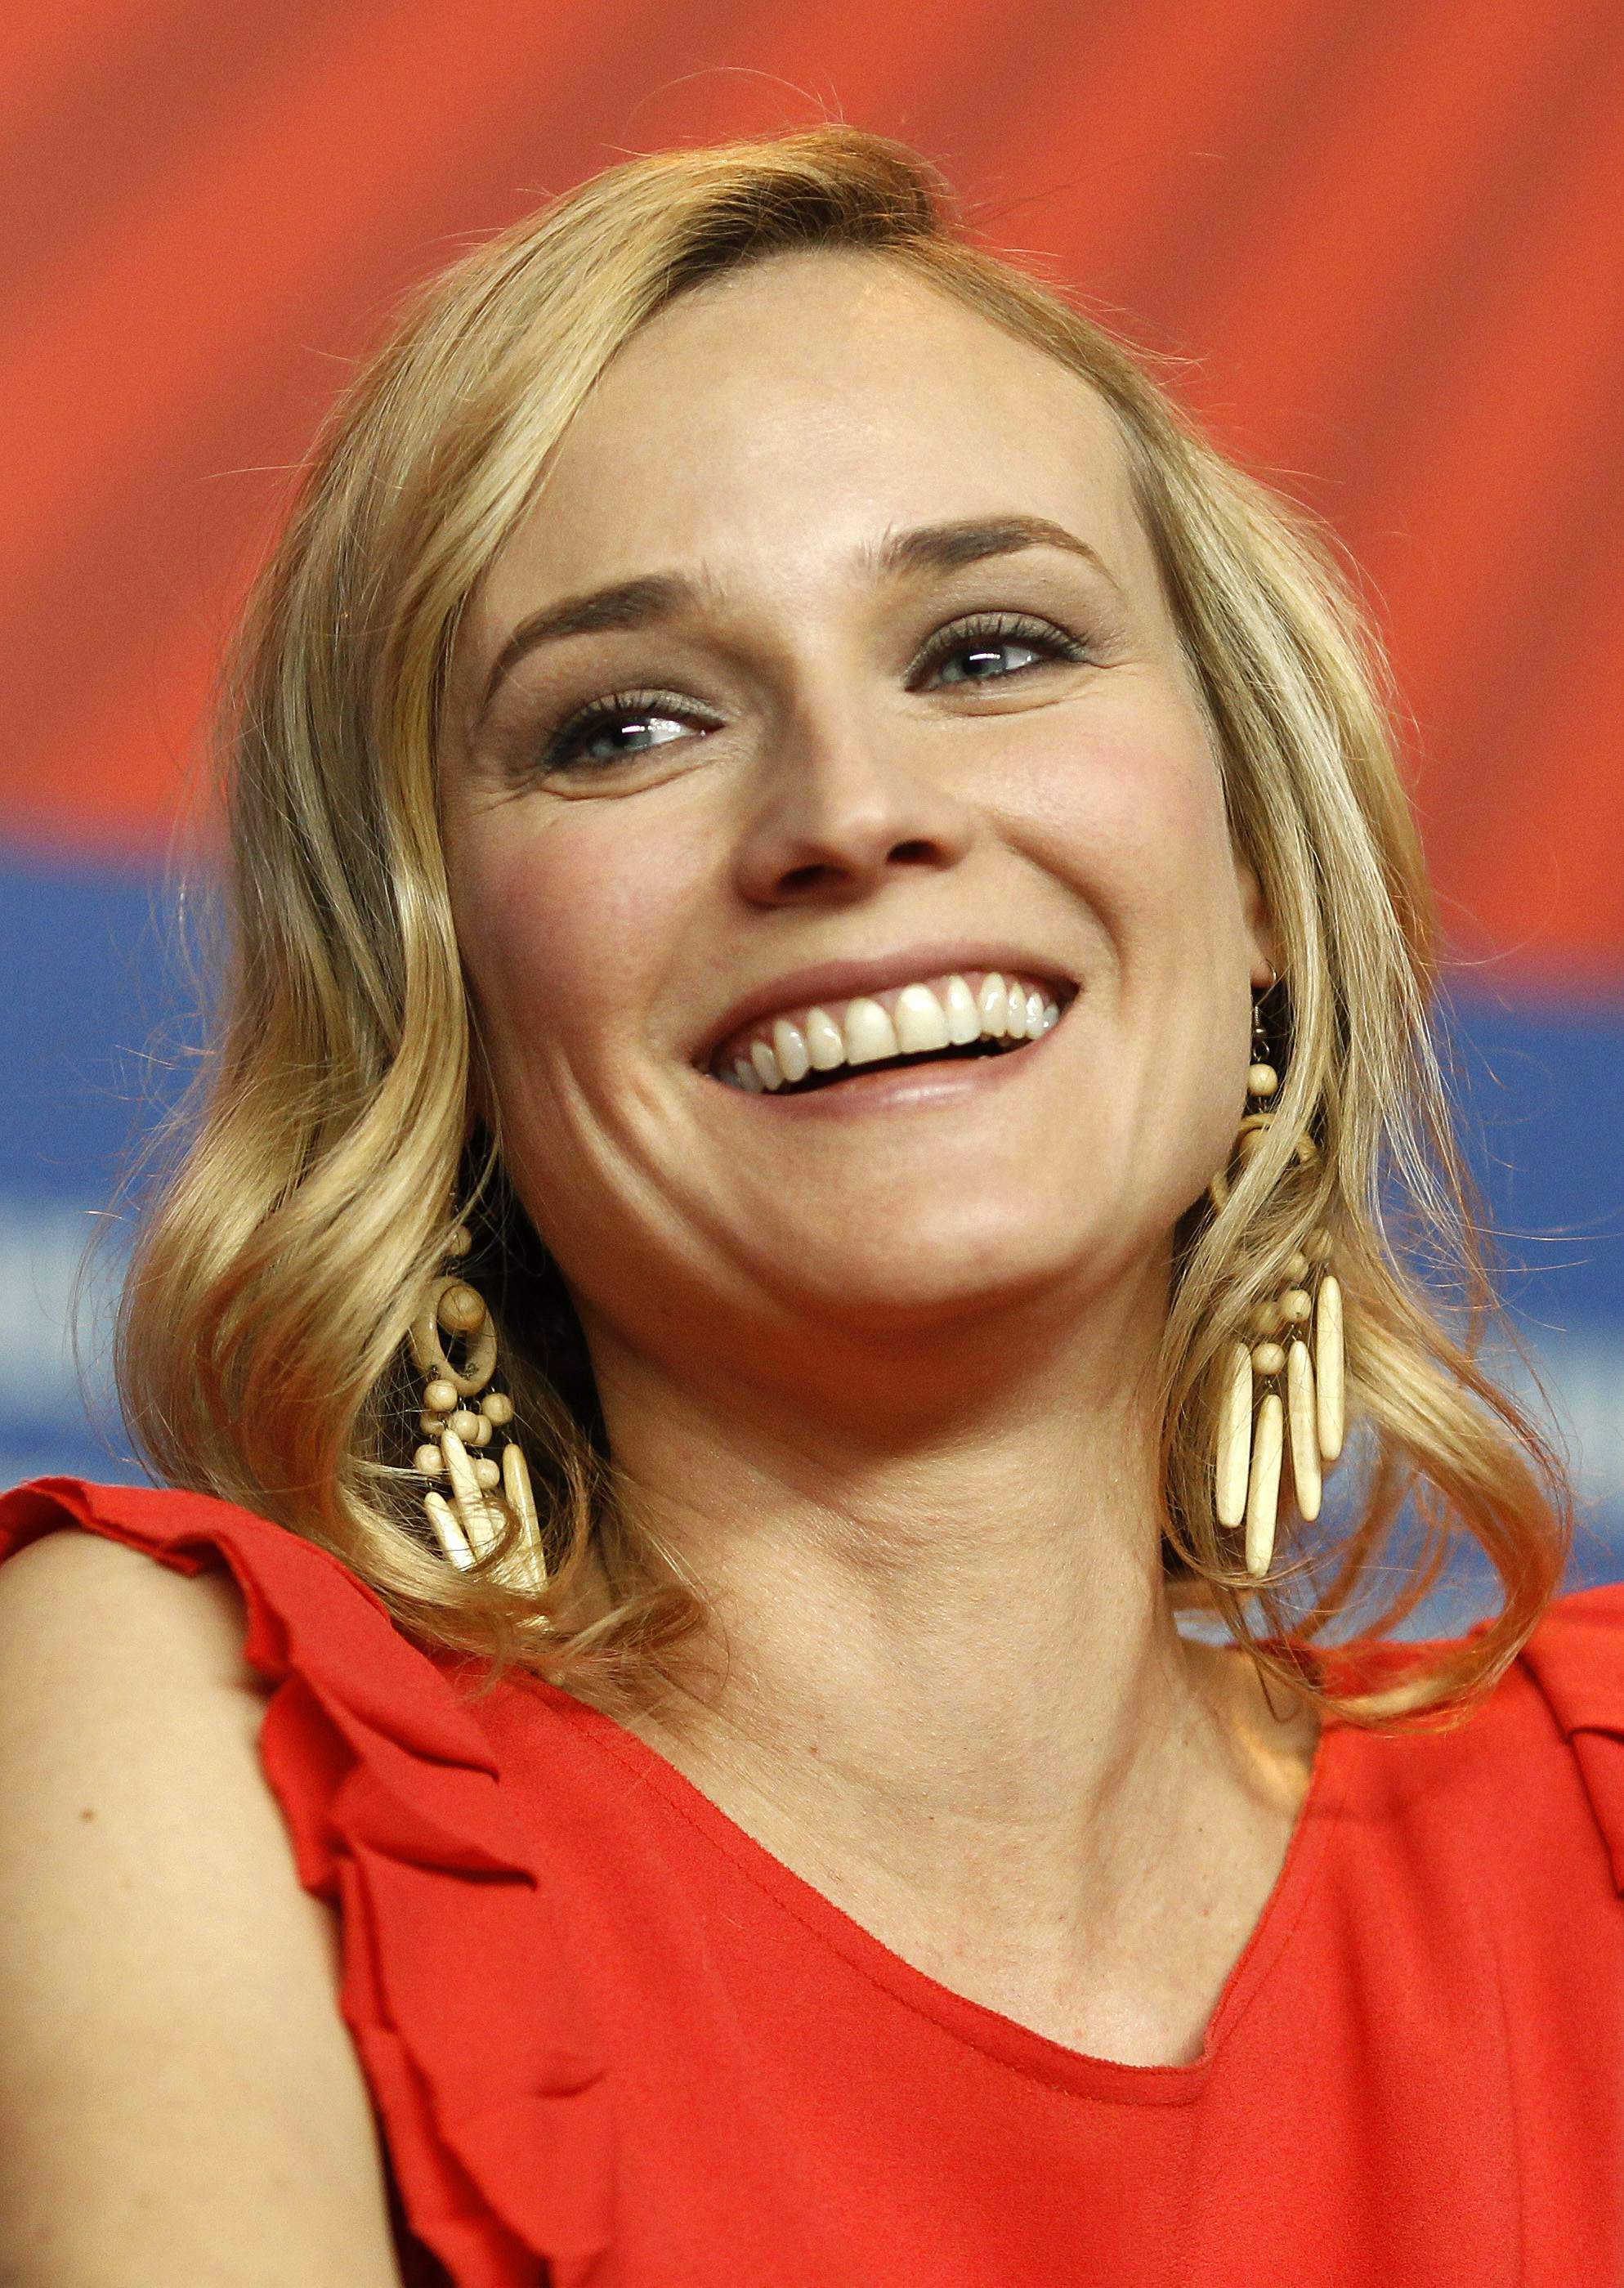 Diane Kruger photo 209 of 1759 pics, wallpaper - photo #489670 - ThePlace2